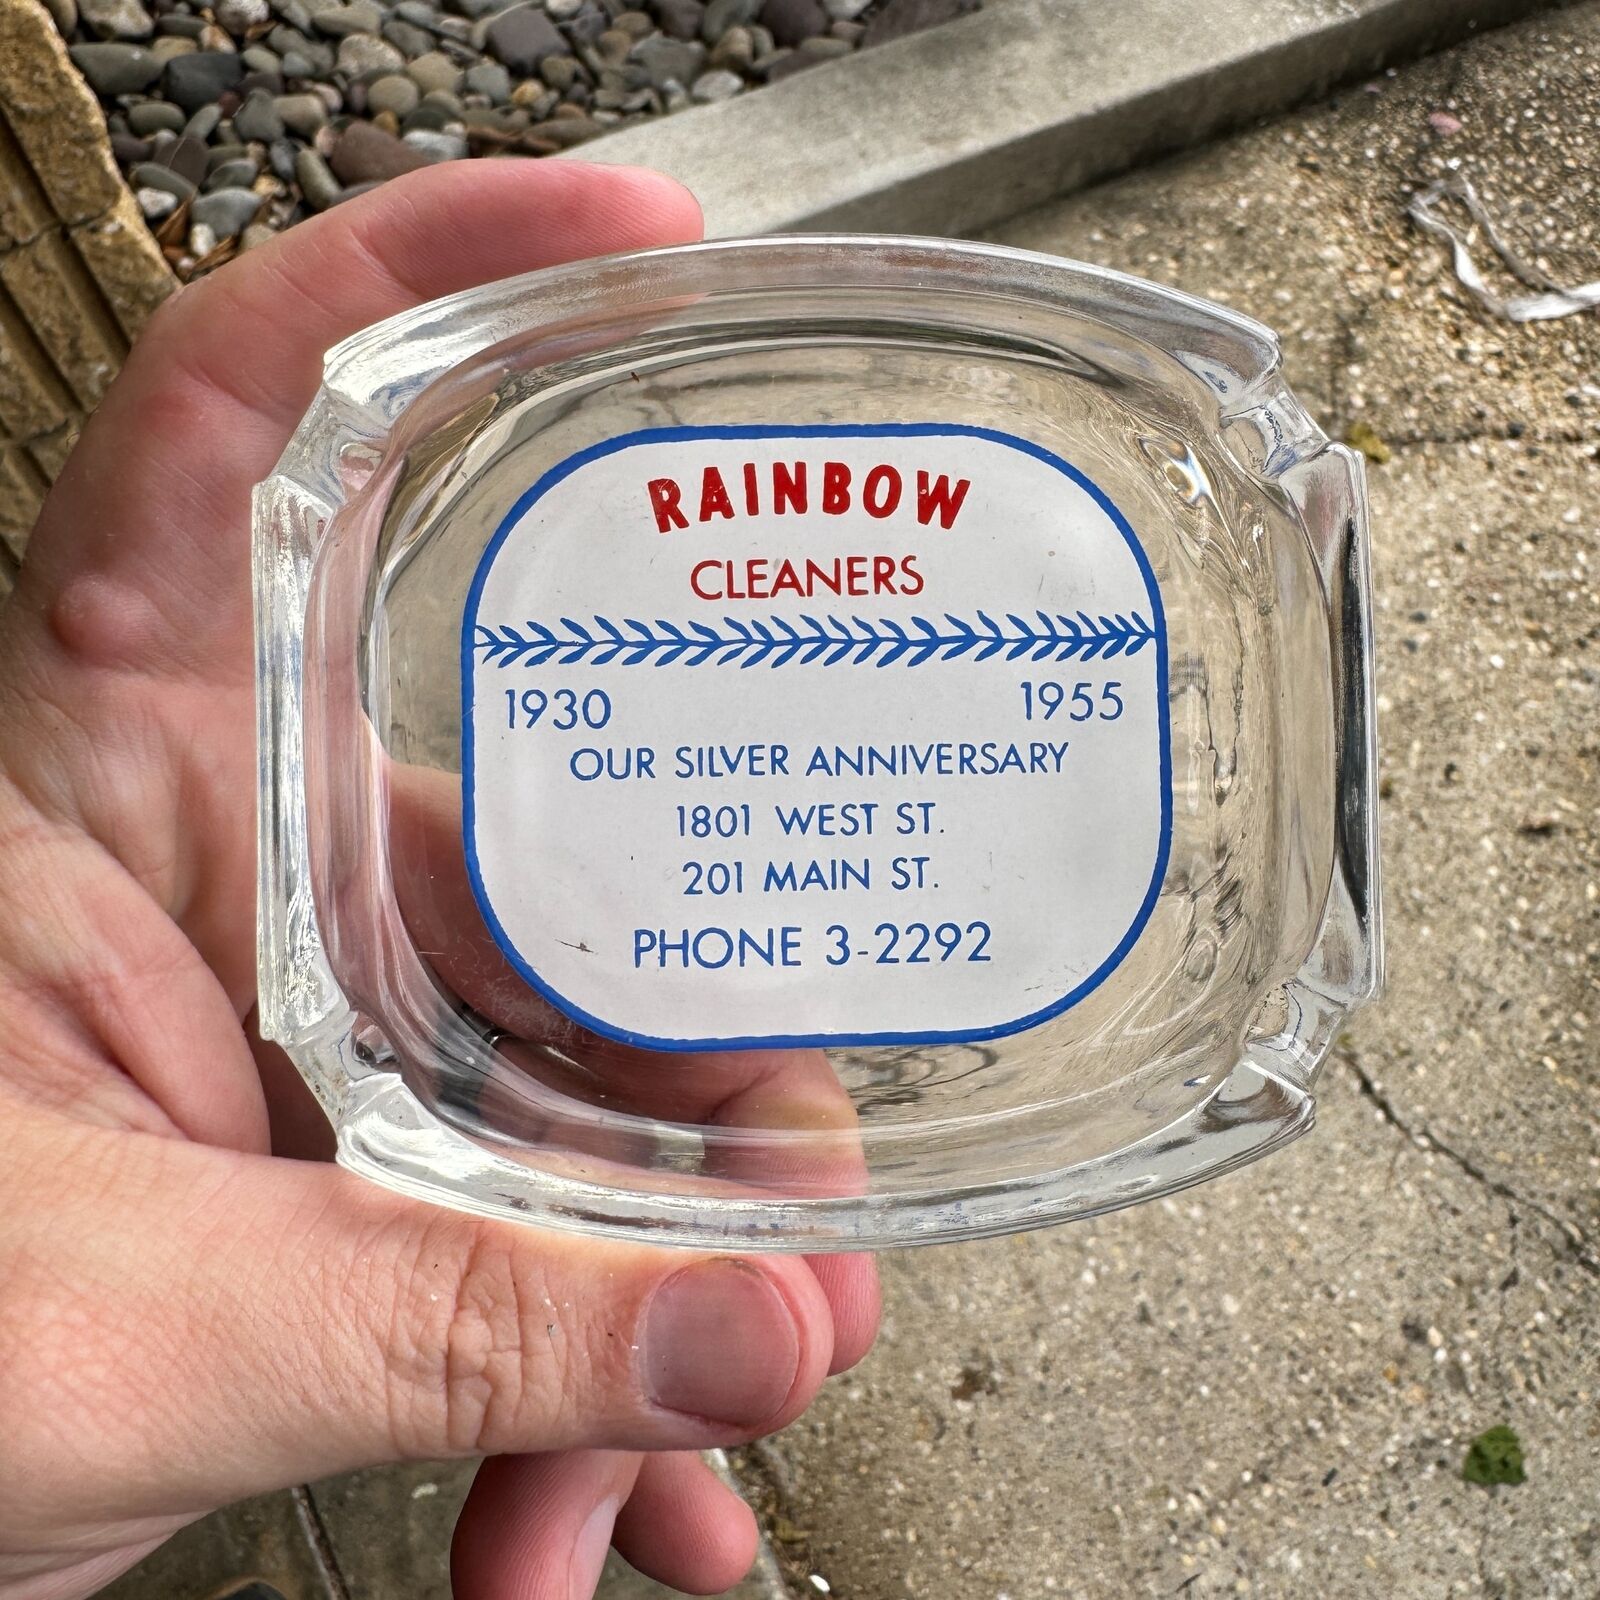 Vintage c.1950s RAINBOW CLEANERS Advertising Glass Ashtray ANNAPOLIS, MD